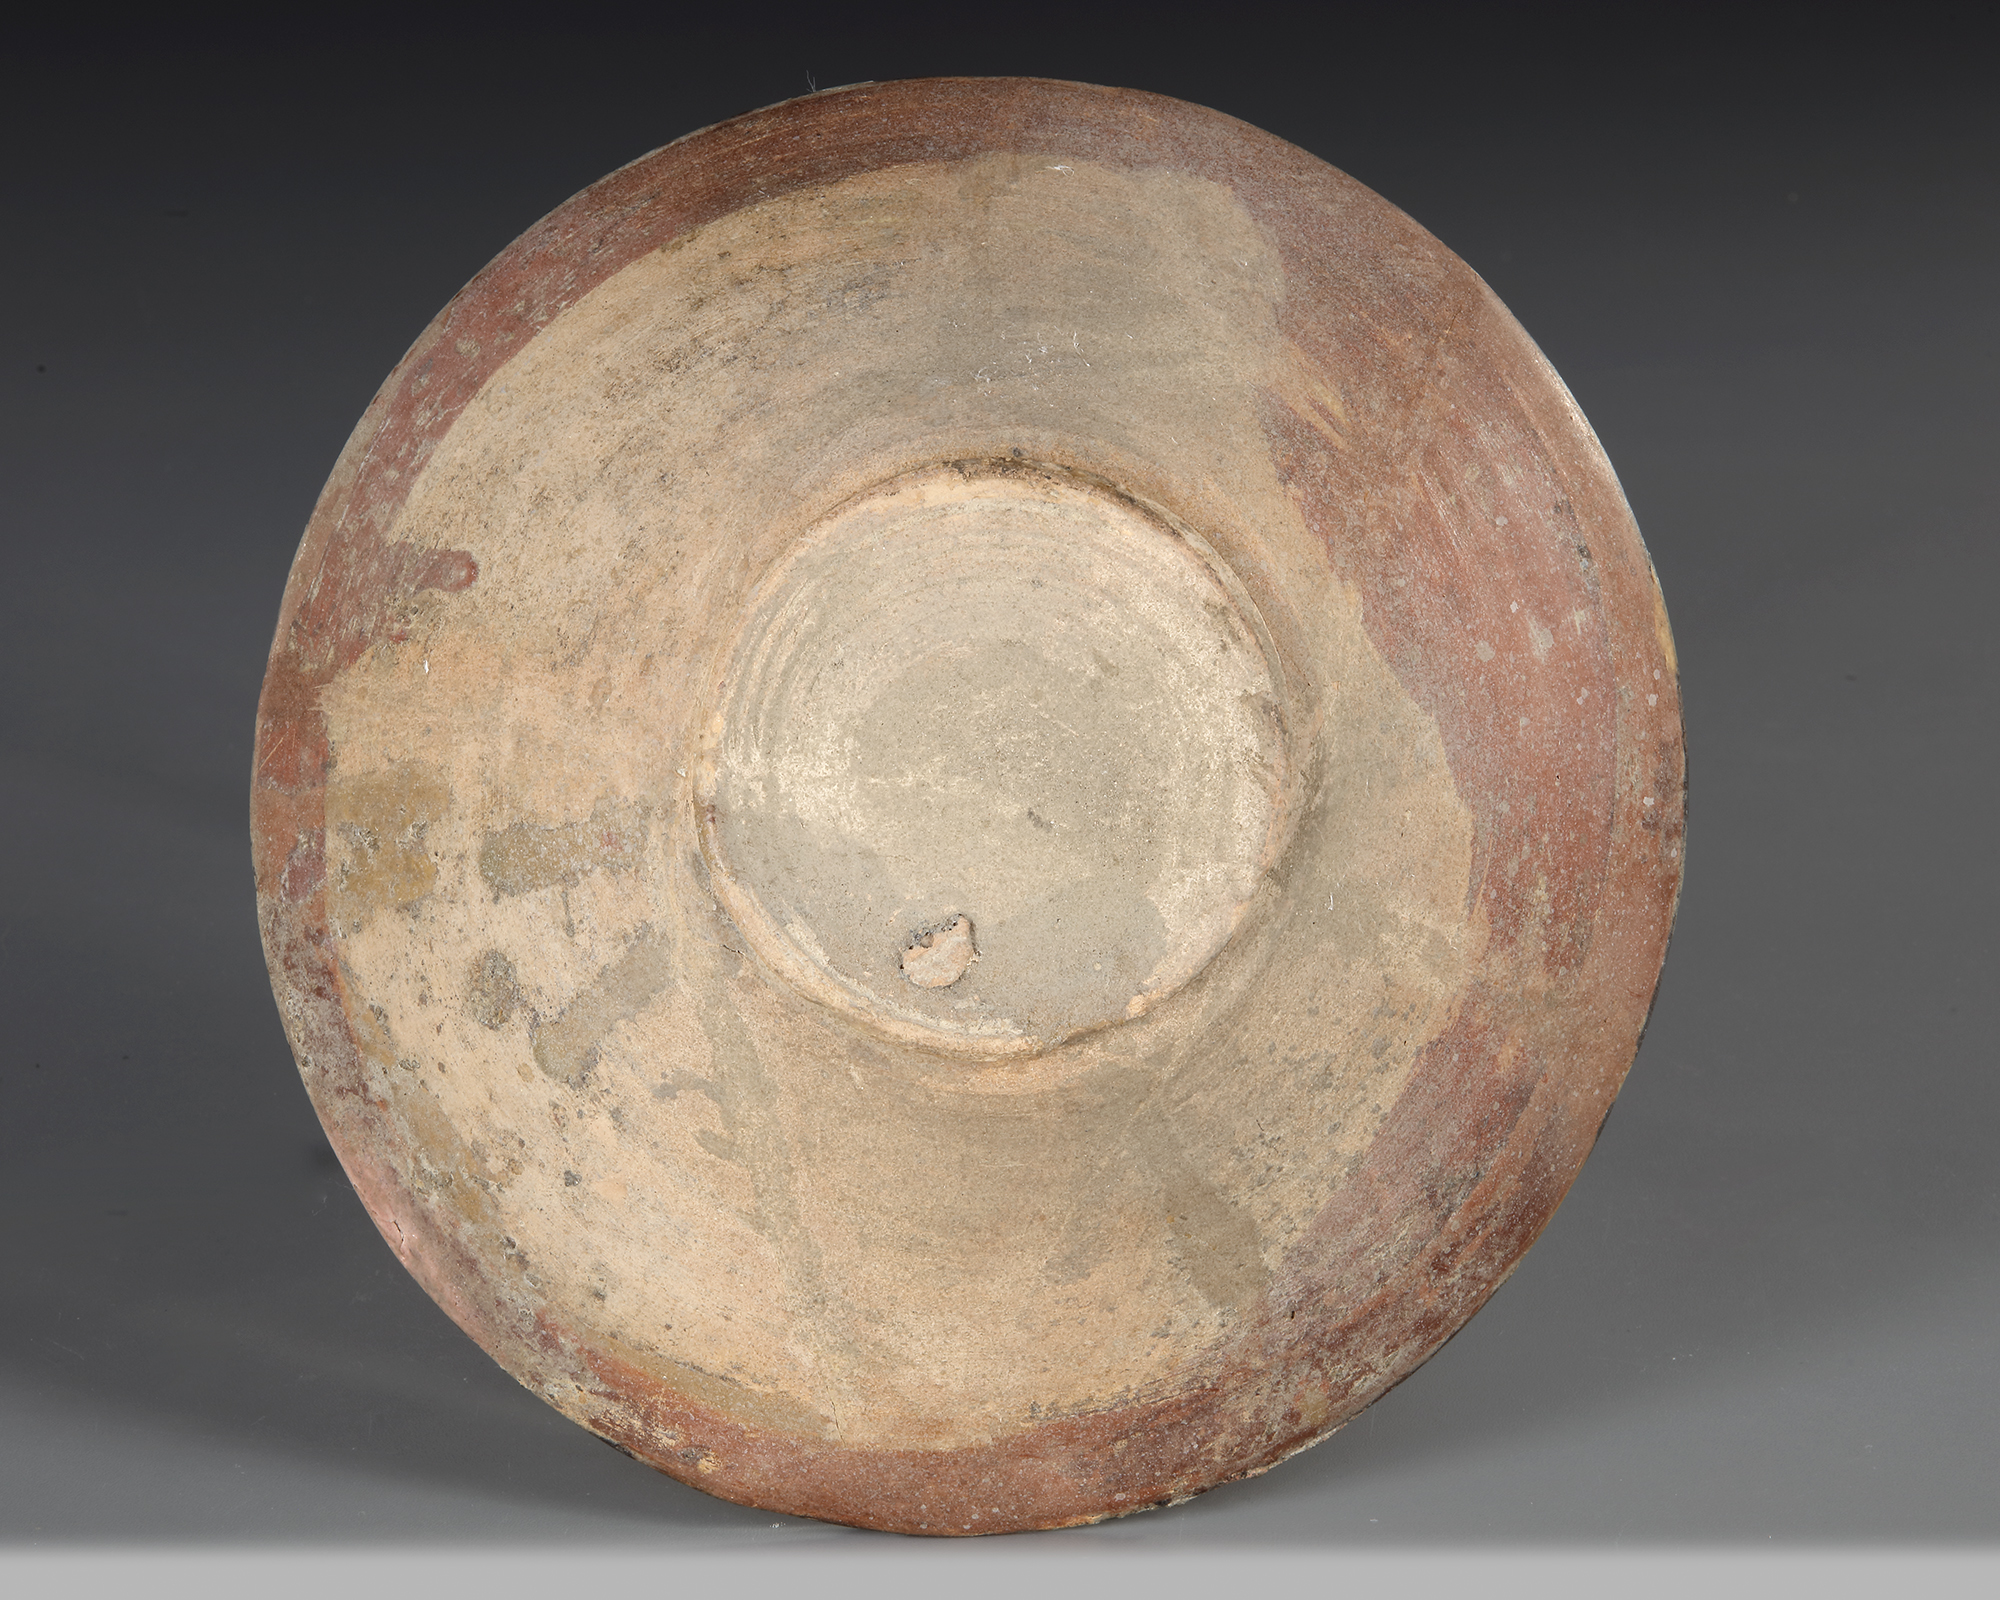 A NISHAPUR CONICAL POTTERY BOWL, PERSIA, 10TH CENTURY - Image 10 of 10